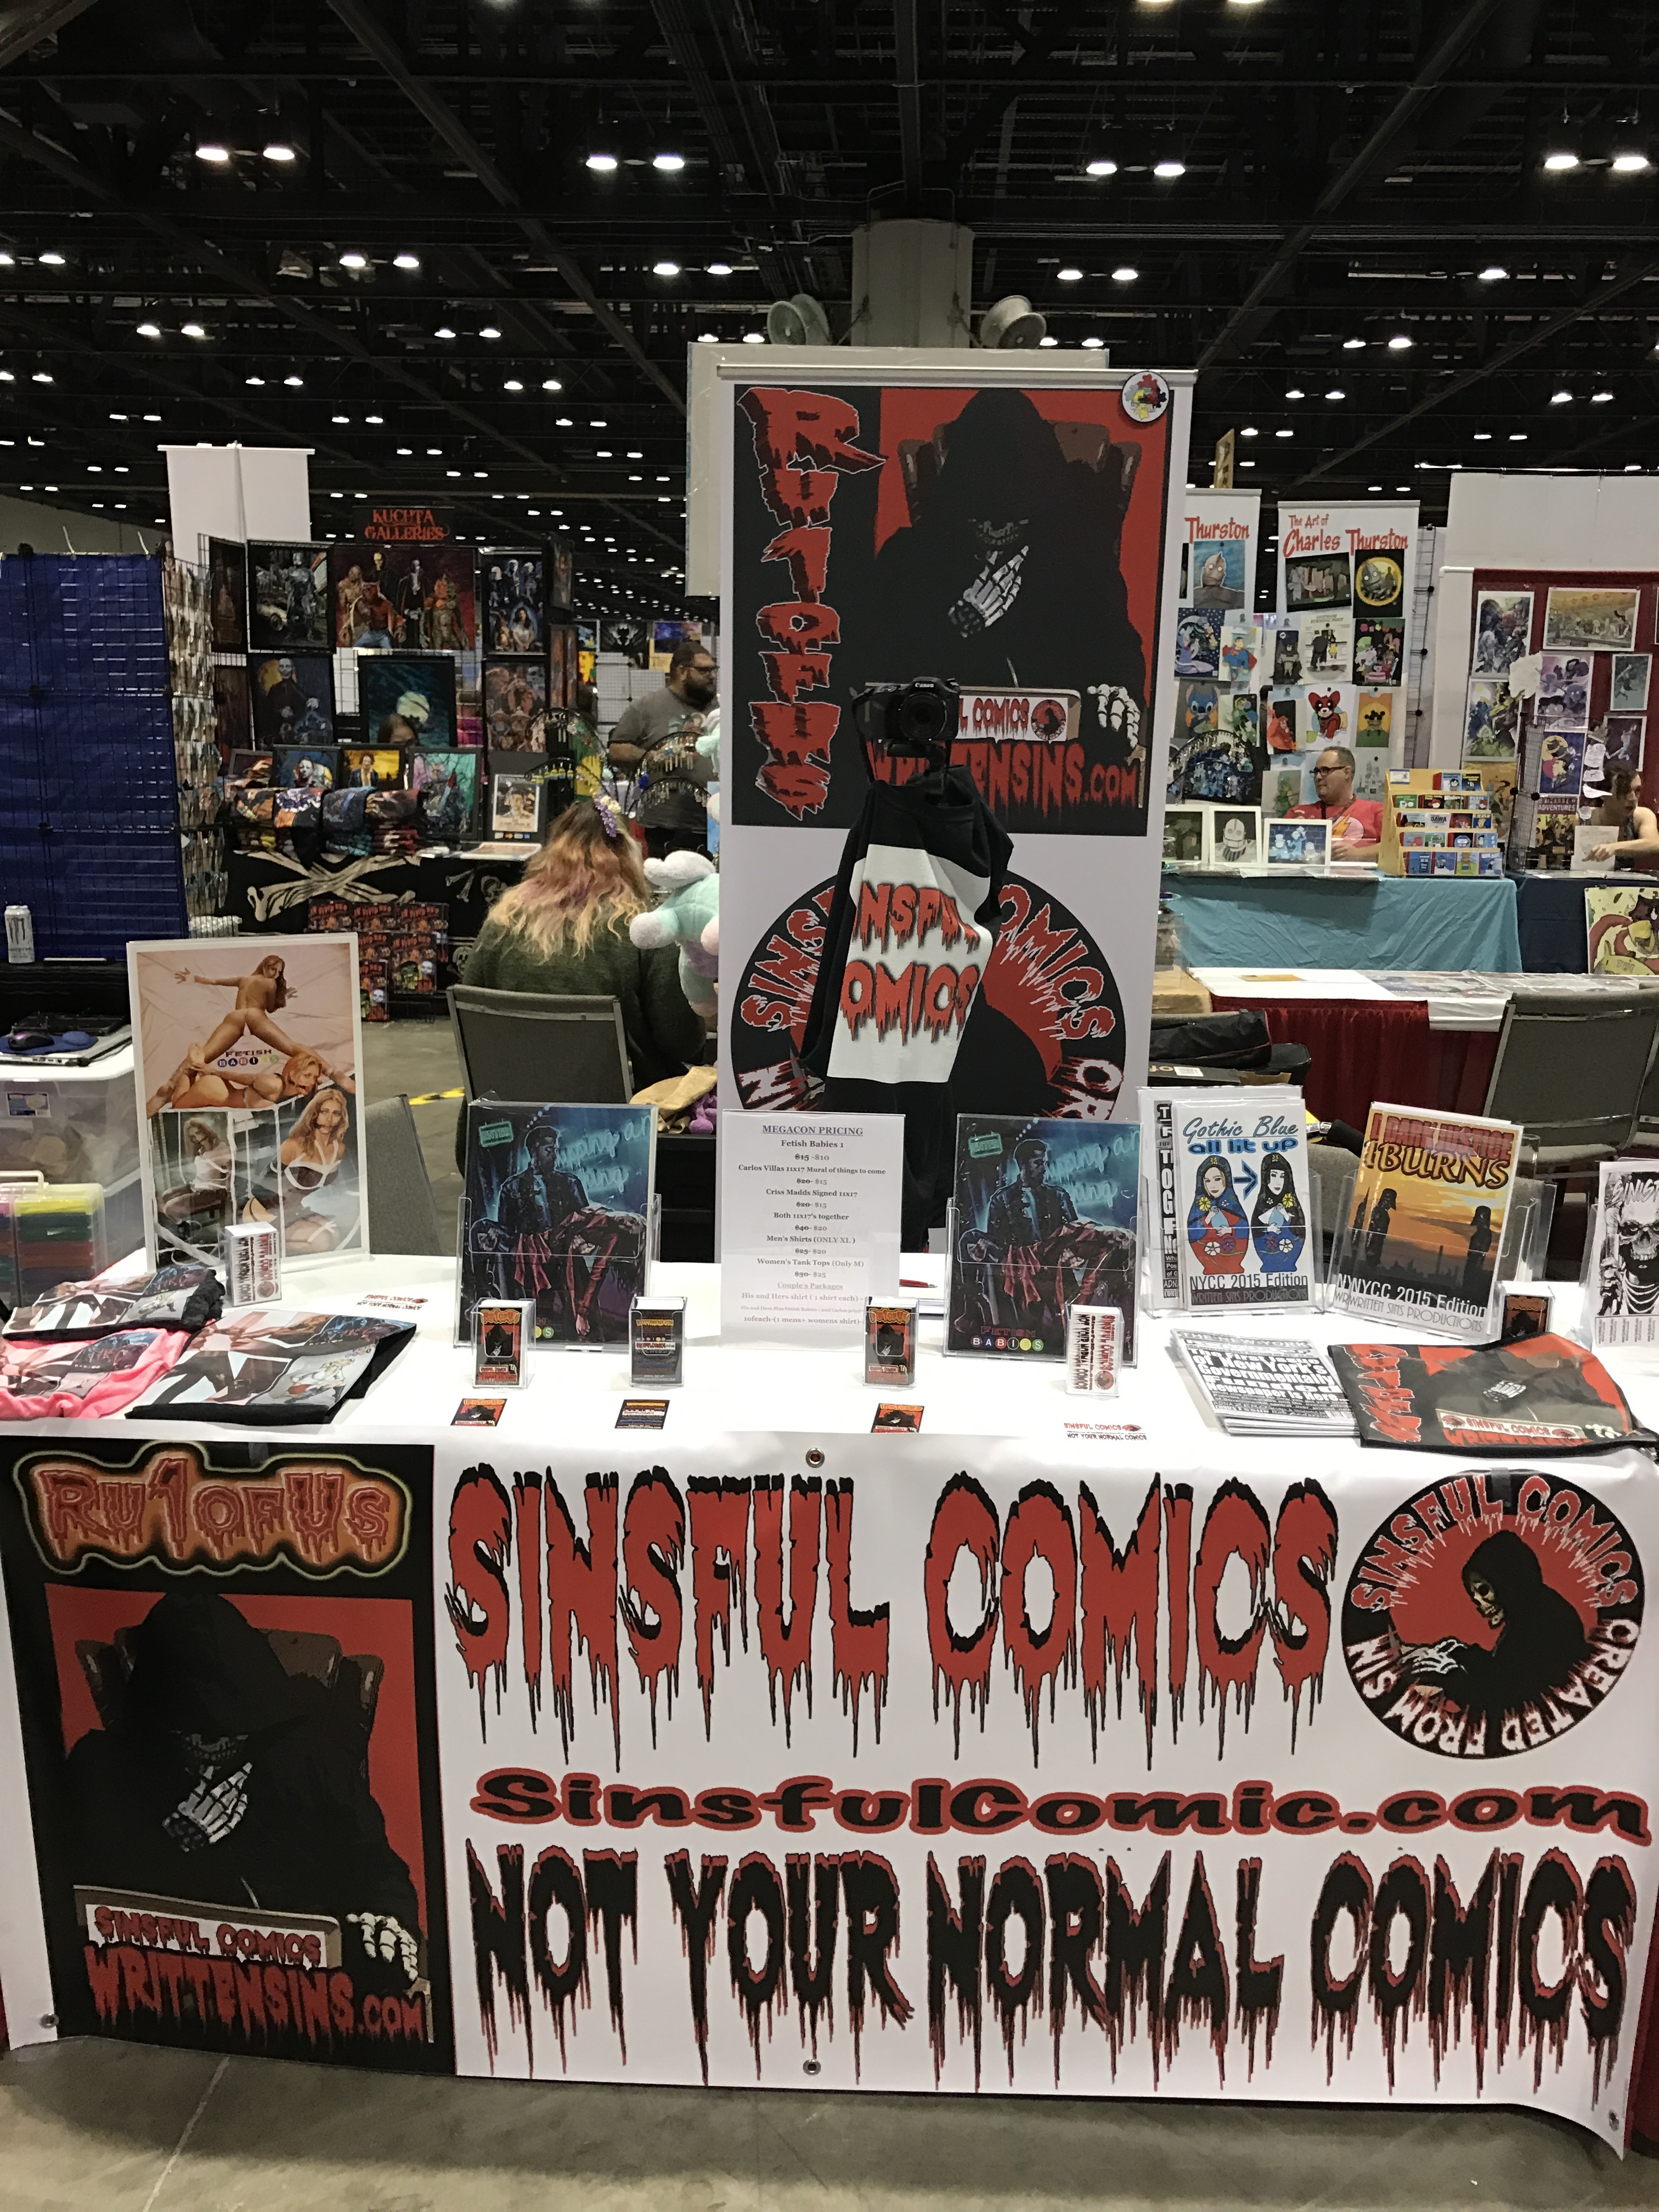 Written Sins is sharing a Table with Sinsful Comics where you can get Fetish Babies at Mega Con this weekend